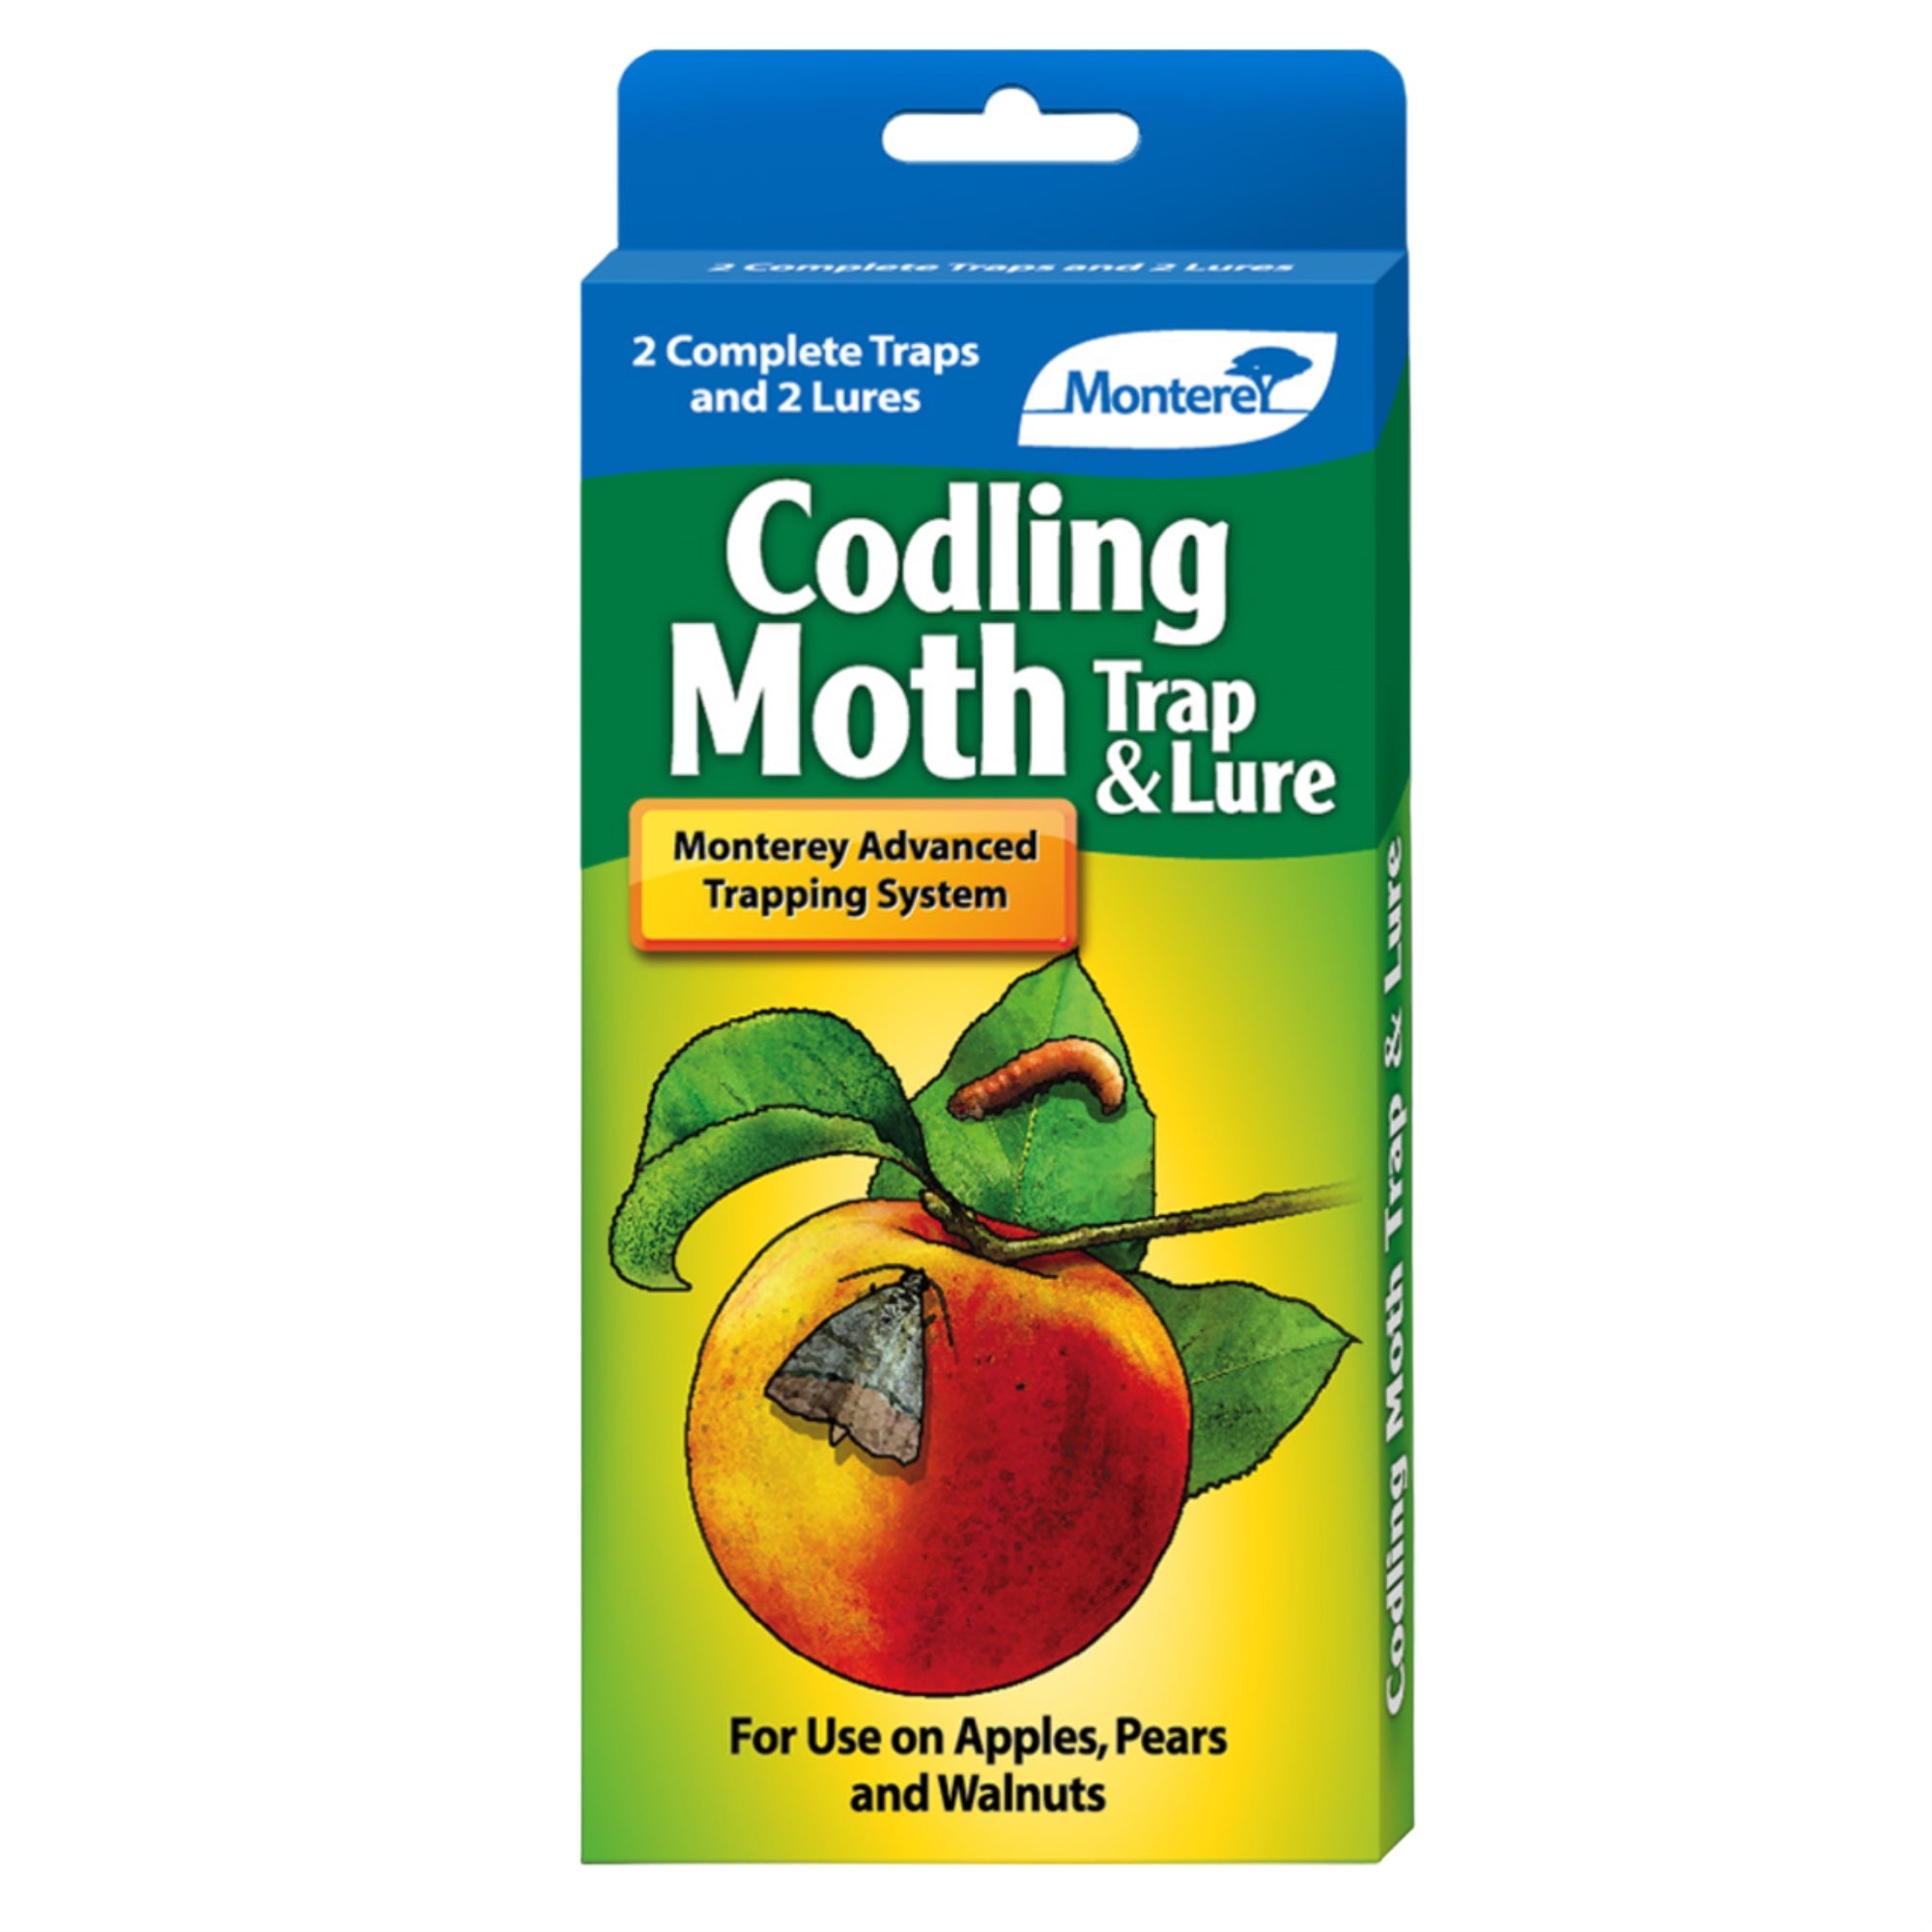 Monterey Codling Moth Trapping System, 2 Complete Pheromone Based Lures and Traps Per Box